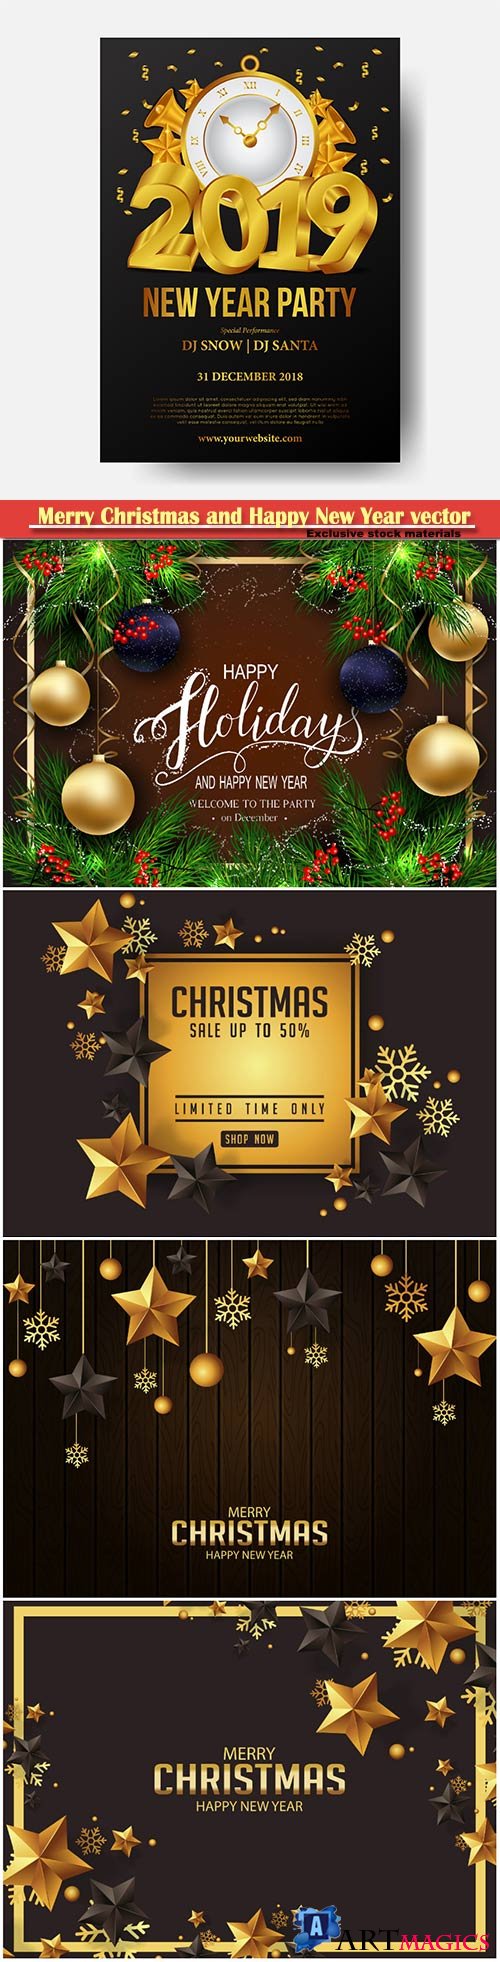 2019 Merry Christmas and Happy New Year vector design # 7